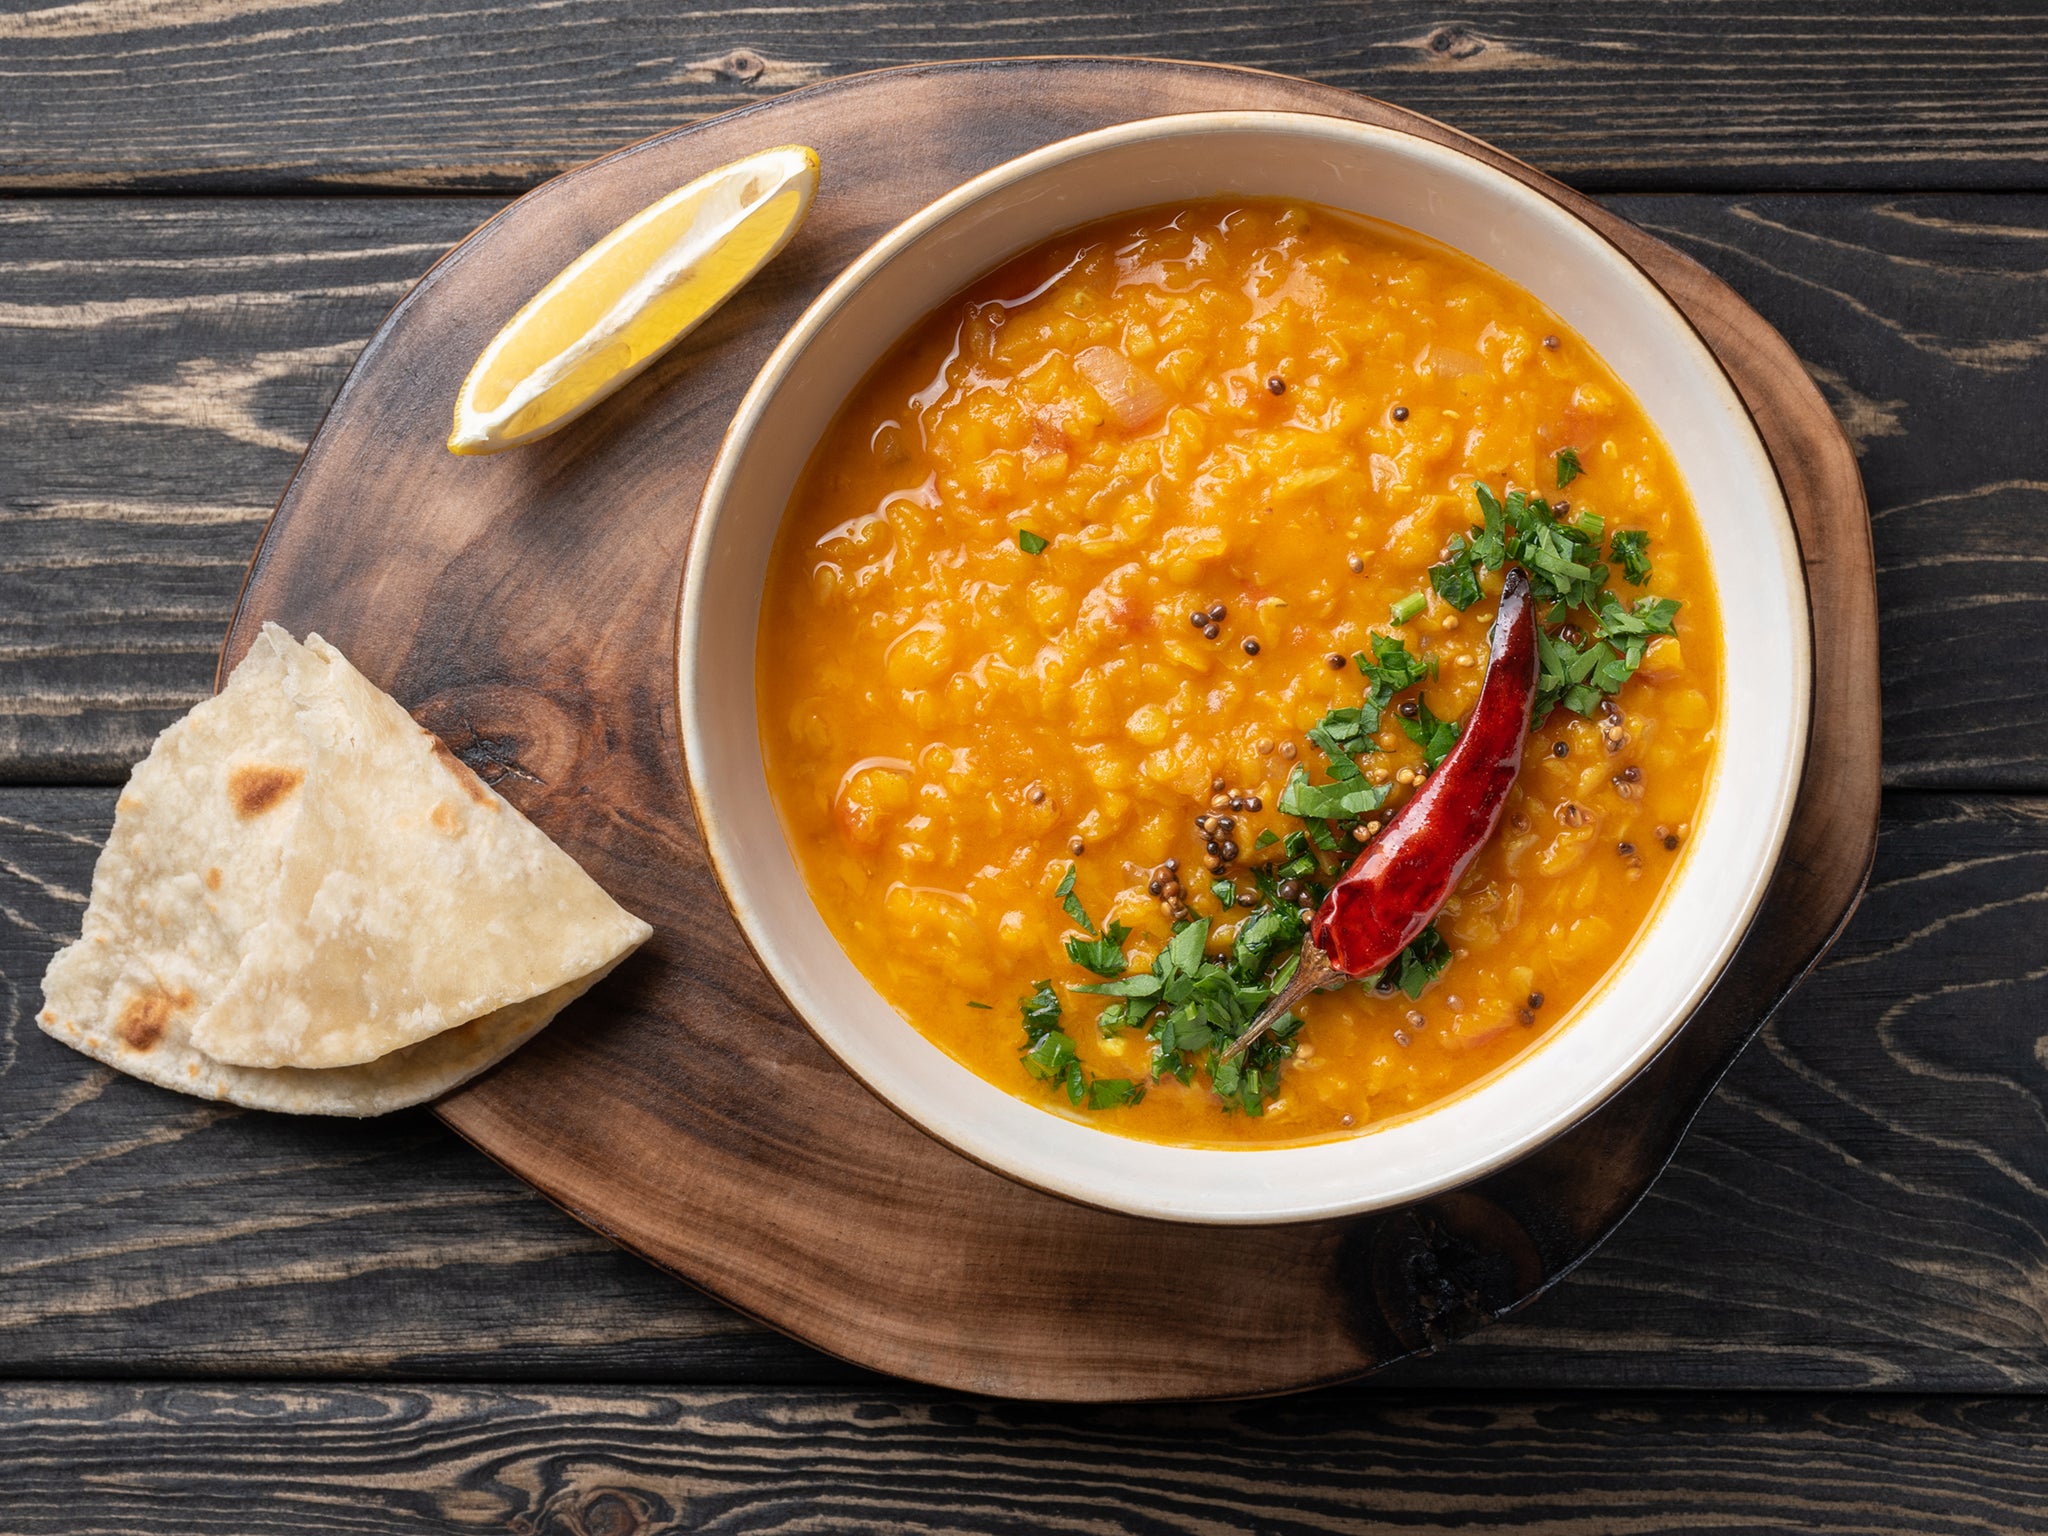 This Sri Lankan dal of tender lentils is central to every meal and usually served with several other dishes